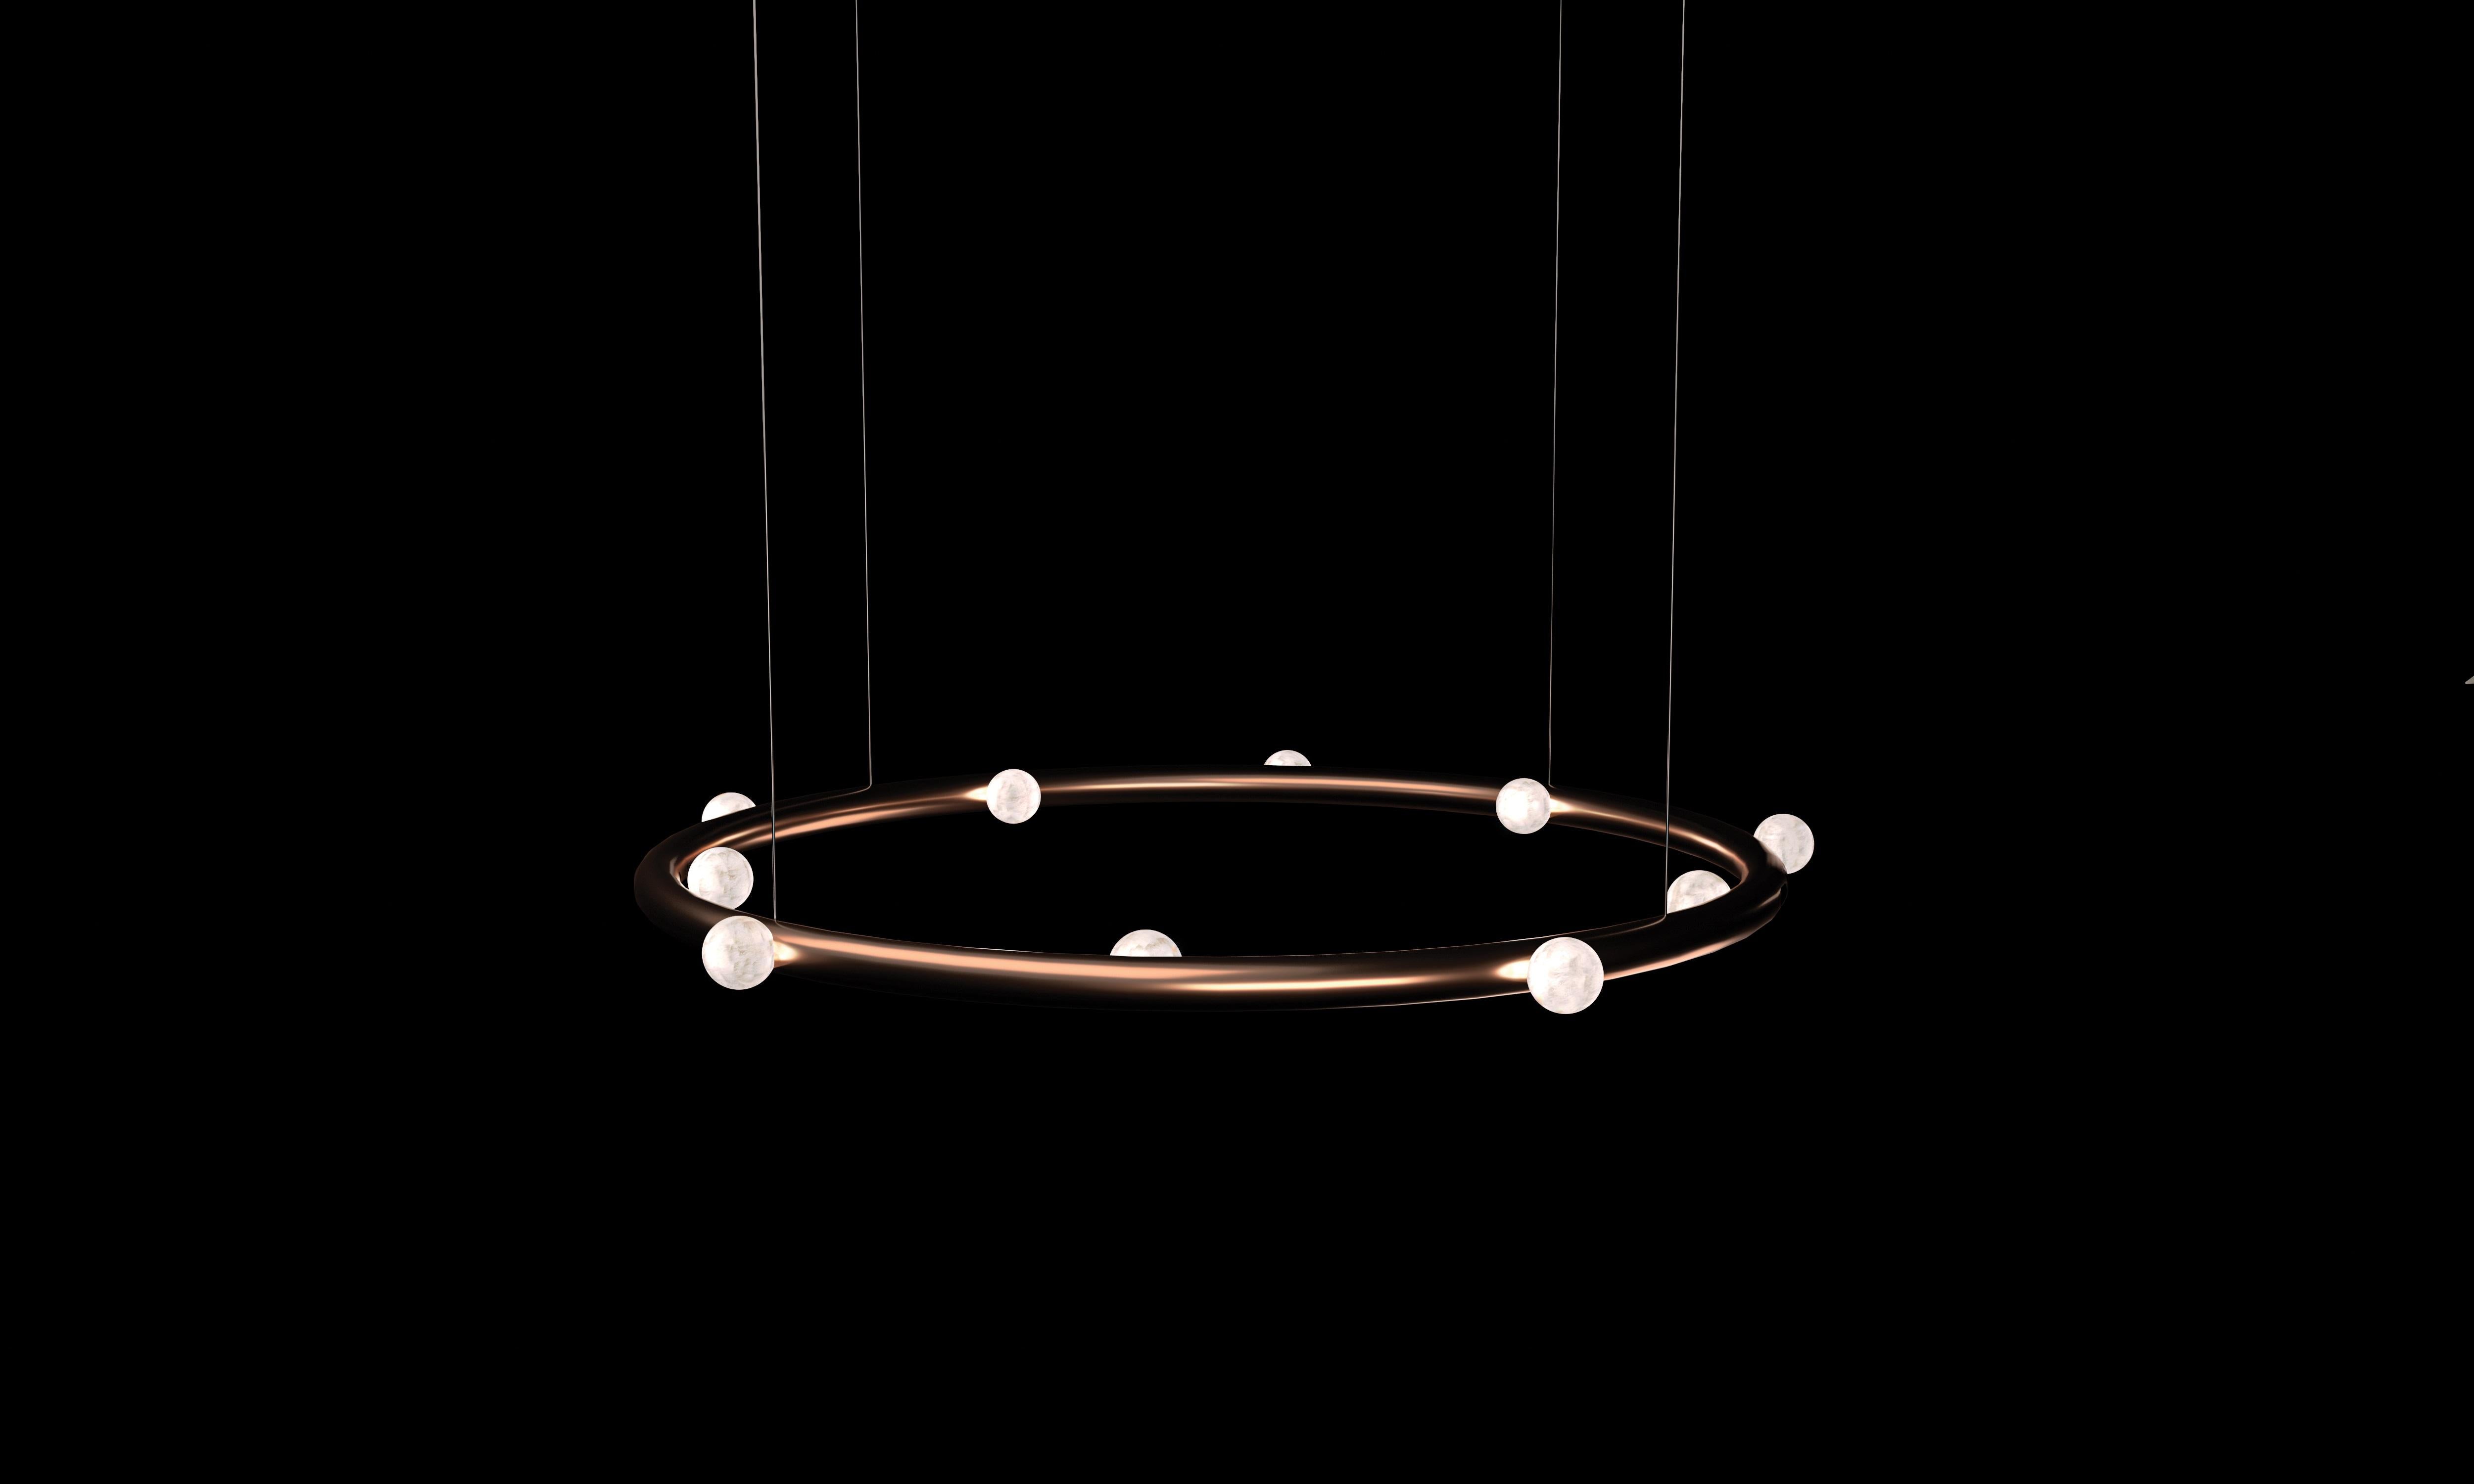 Demetra Round 90 Copper Pendant Lamp by Alabastro Italiano
Dimensions: Ø 90 x H 200 cm.
Materials: White alabaster and copper.

Available in different finishes: Shiny Silver, Bronze, Brushed Brass, Ruggine of Florence, Brushed Burnished, Shiny Gold,